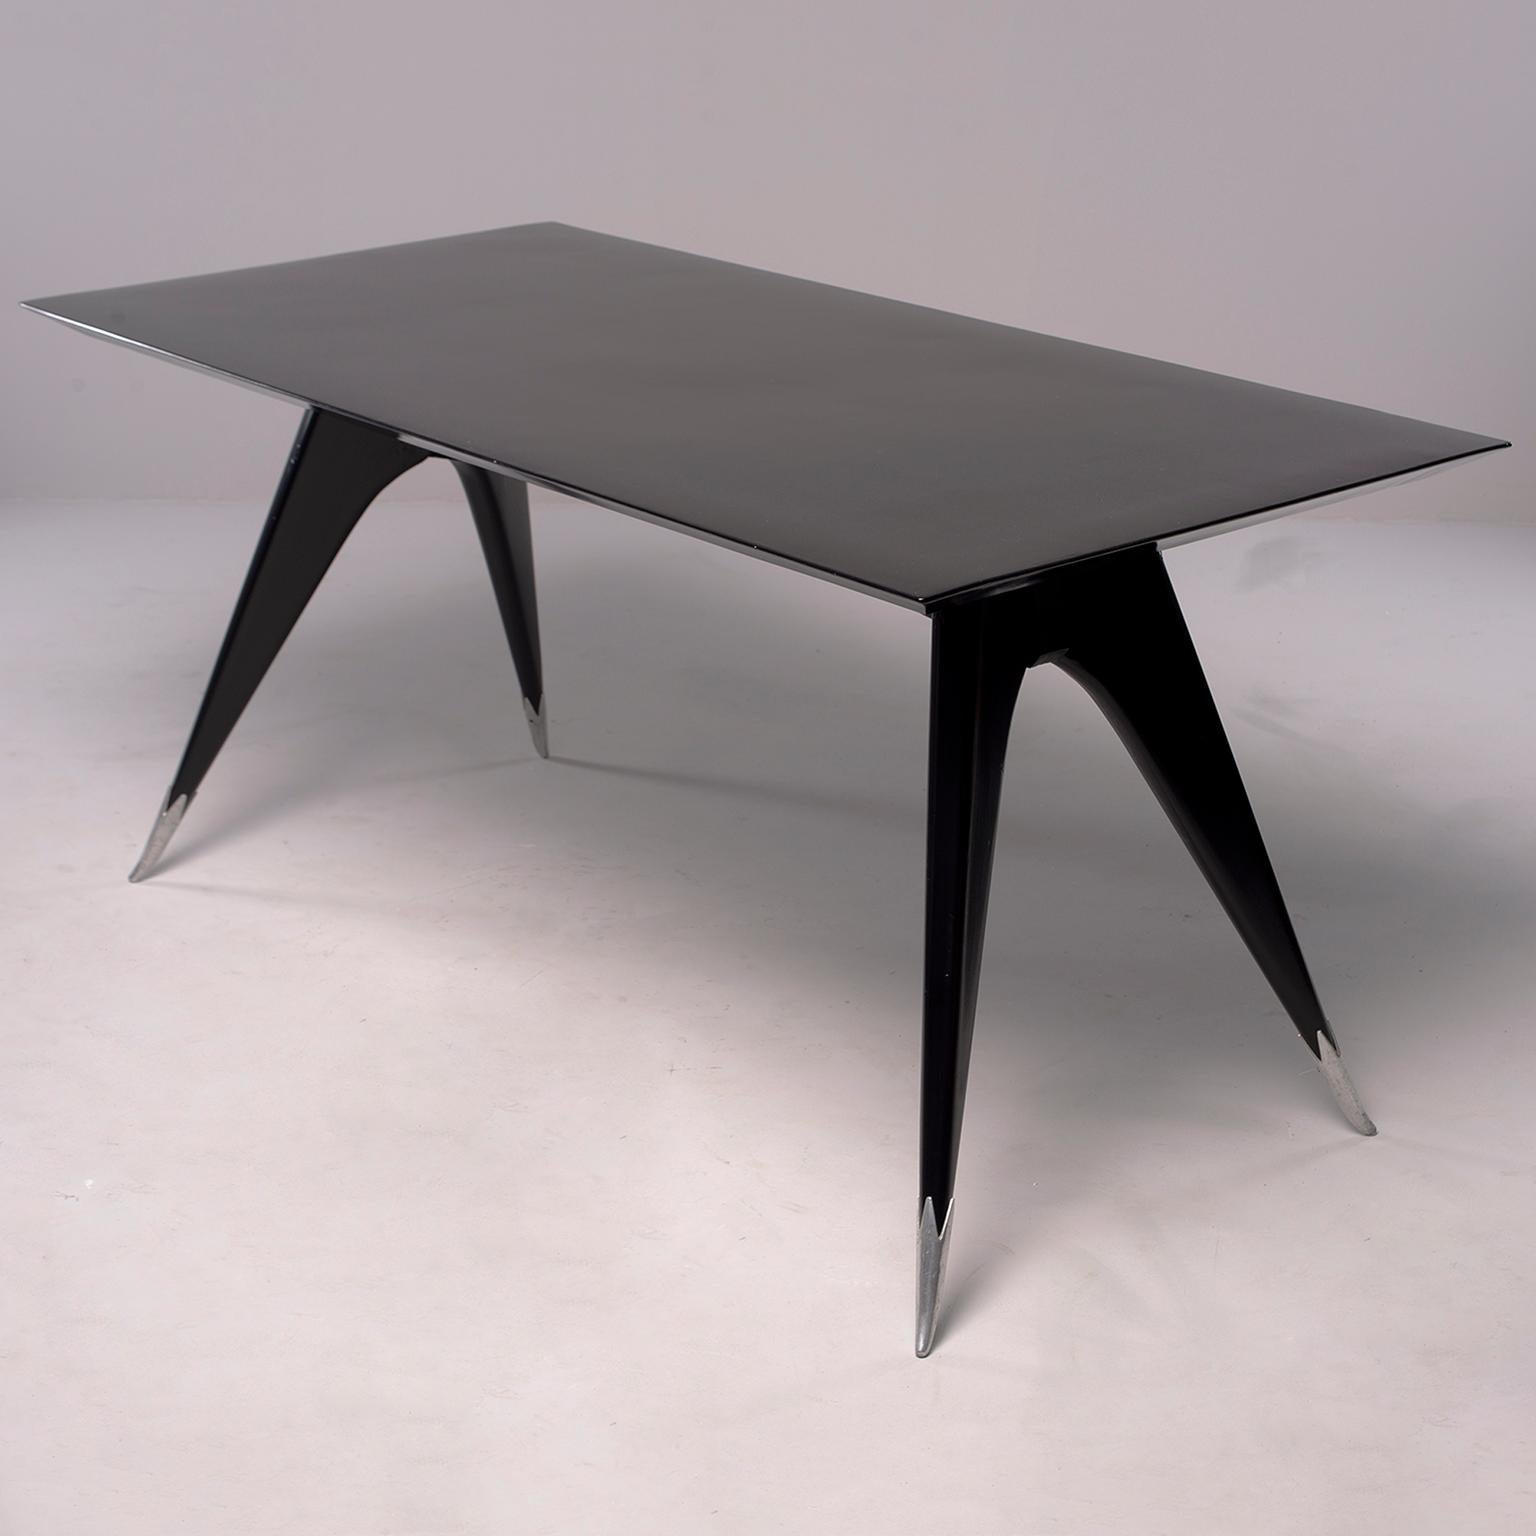 Circa 1960 Italian dining table has great mid century streamlined look with knife edge table top and tapered, splayed legs with silver foot caps.  New, professional ebonised finish. Found in Italy. Unknown maker. 